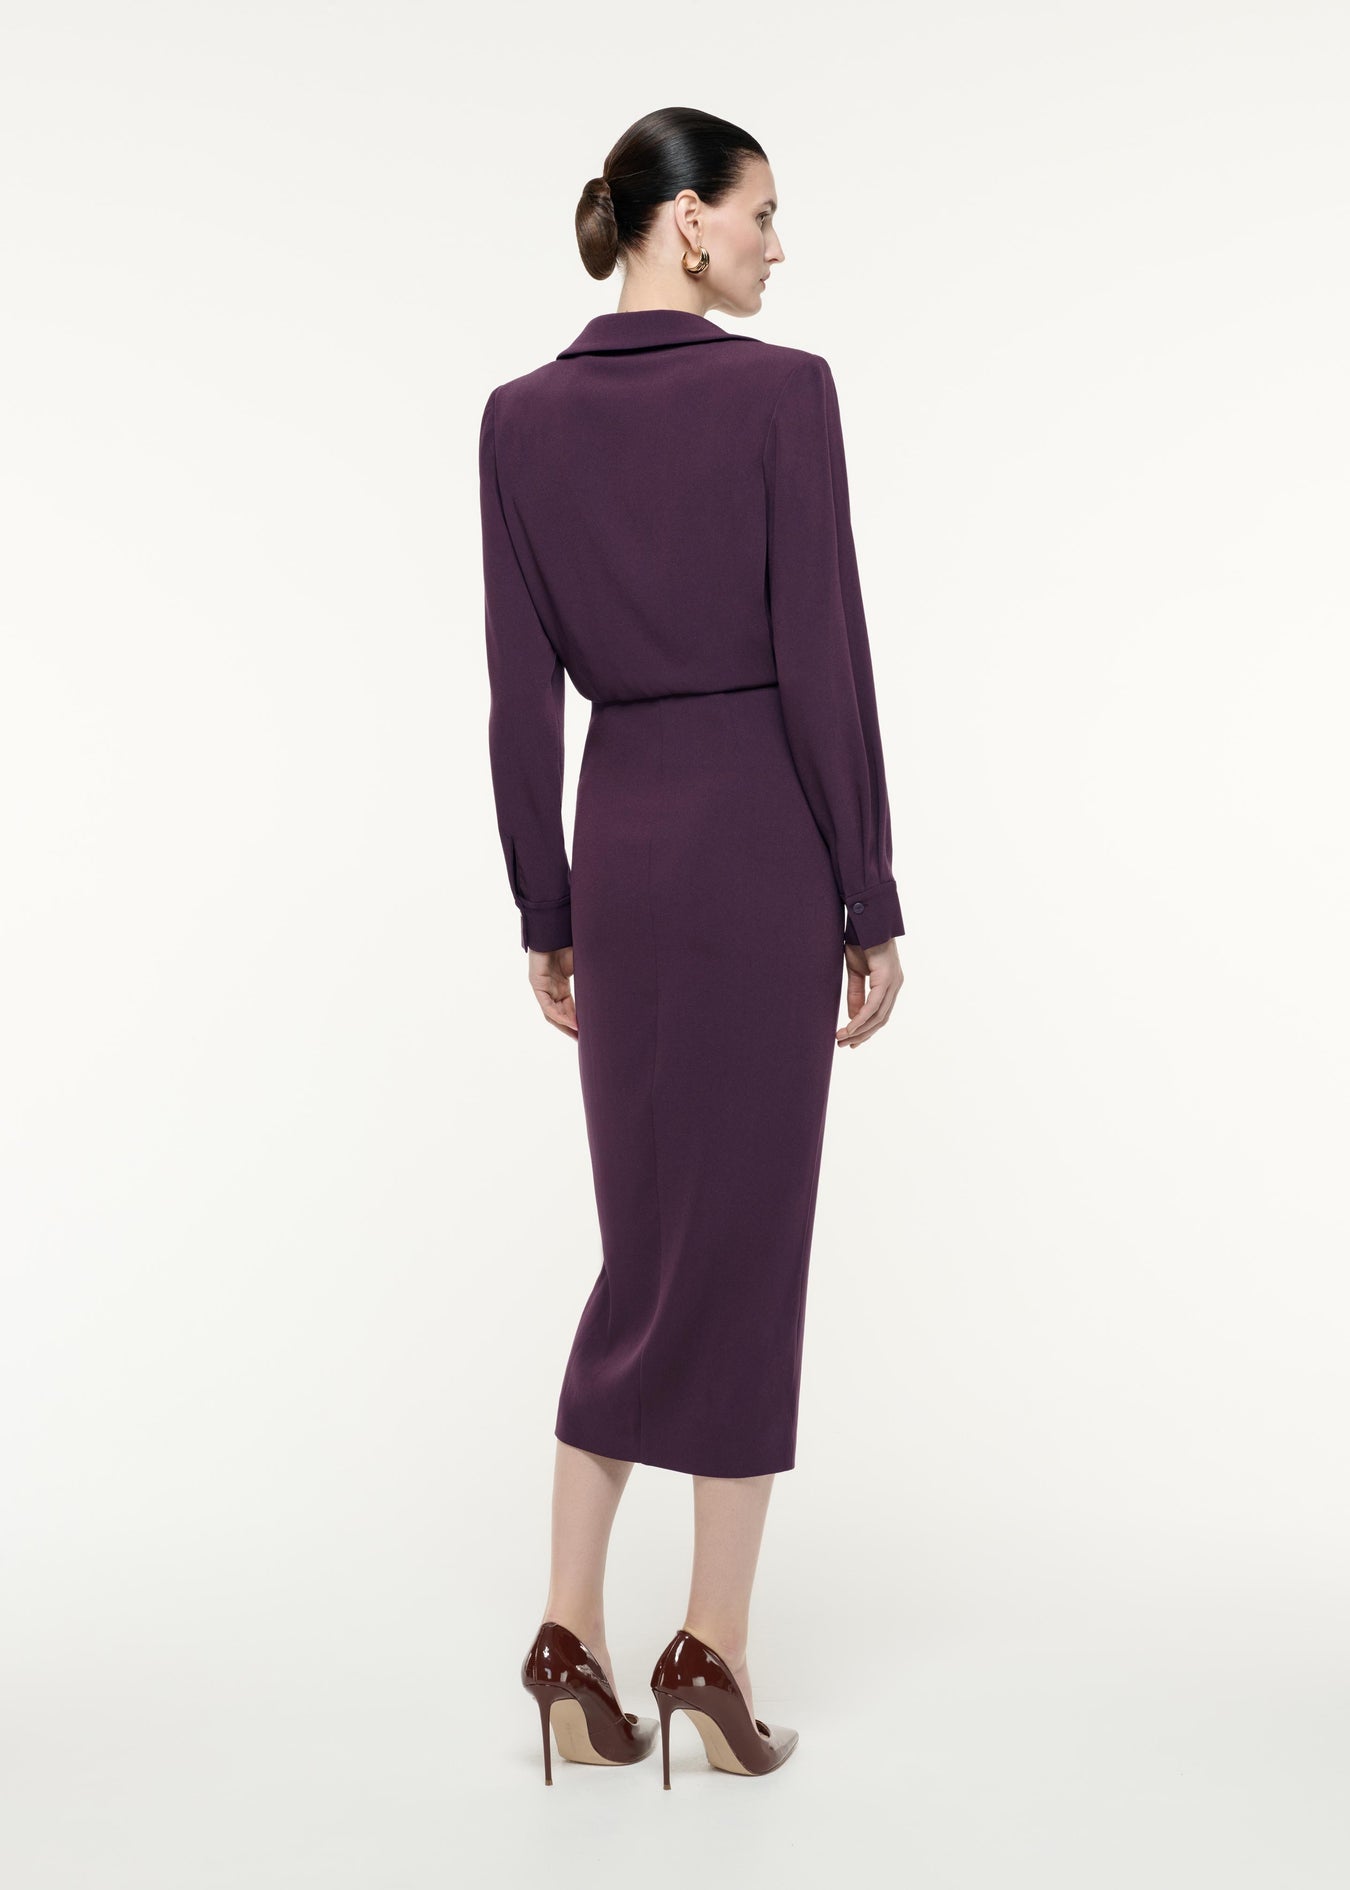 A back view image of a model wearing the Long Sleeve Satin Crepe Midi Dress in Aubergine